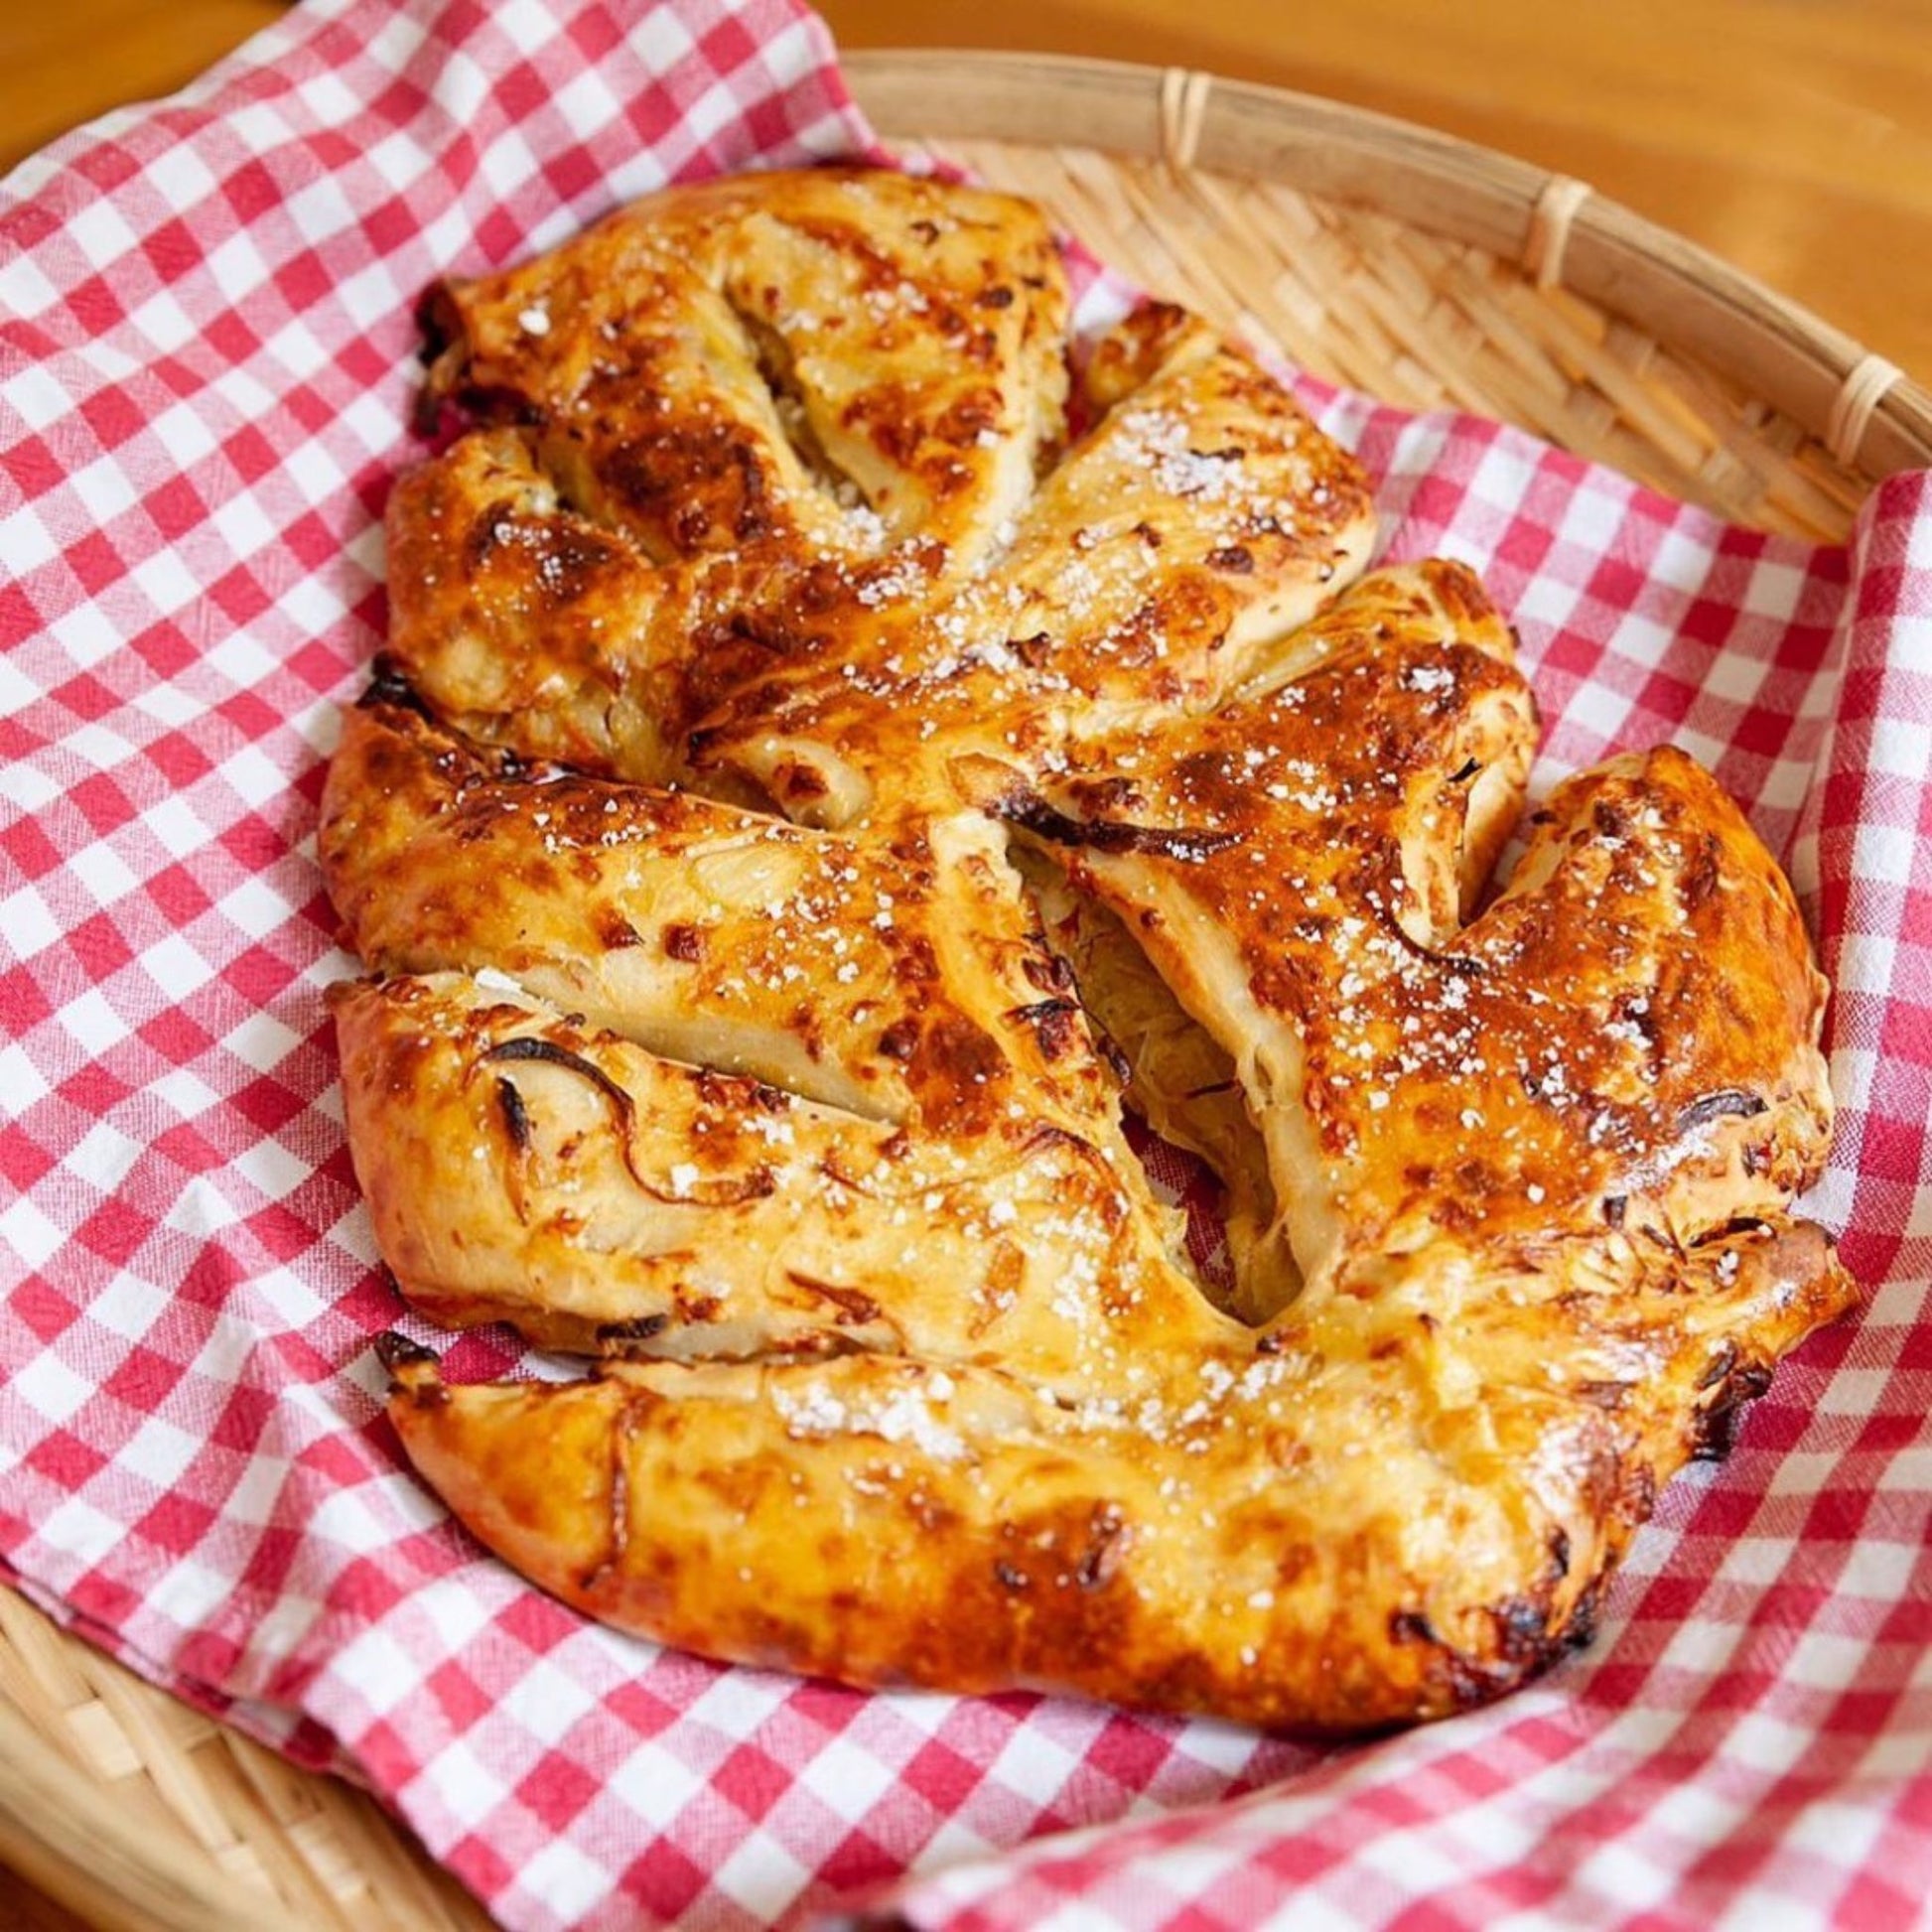 Fougasse bread on a gingham cloth in a basket